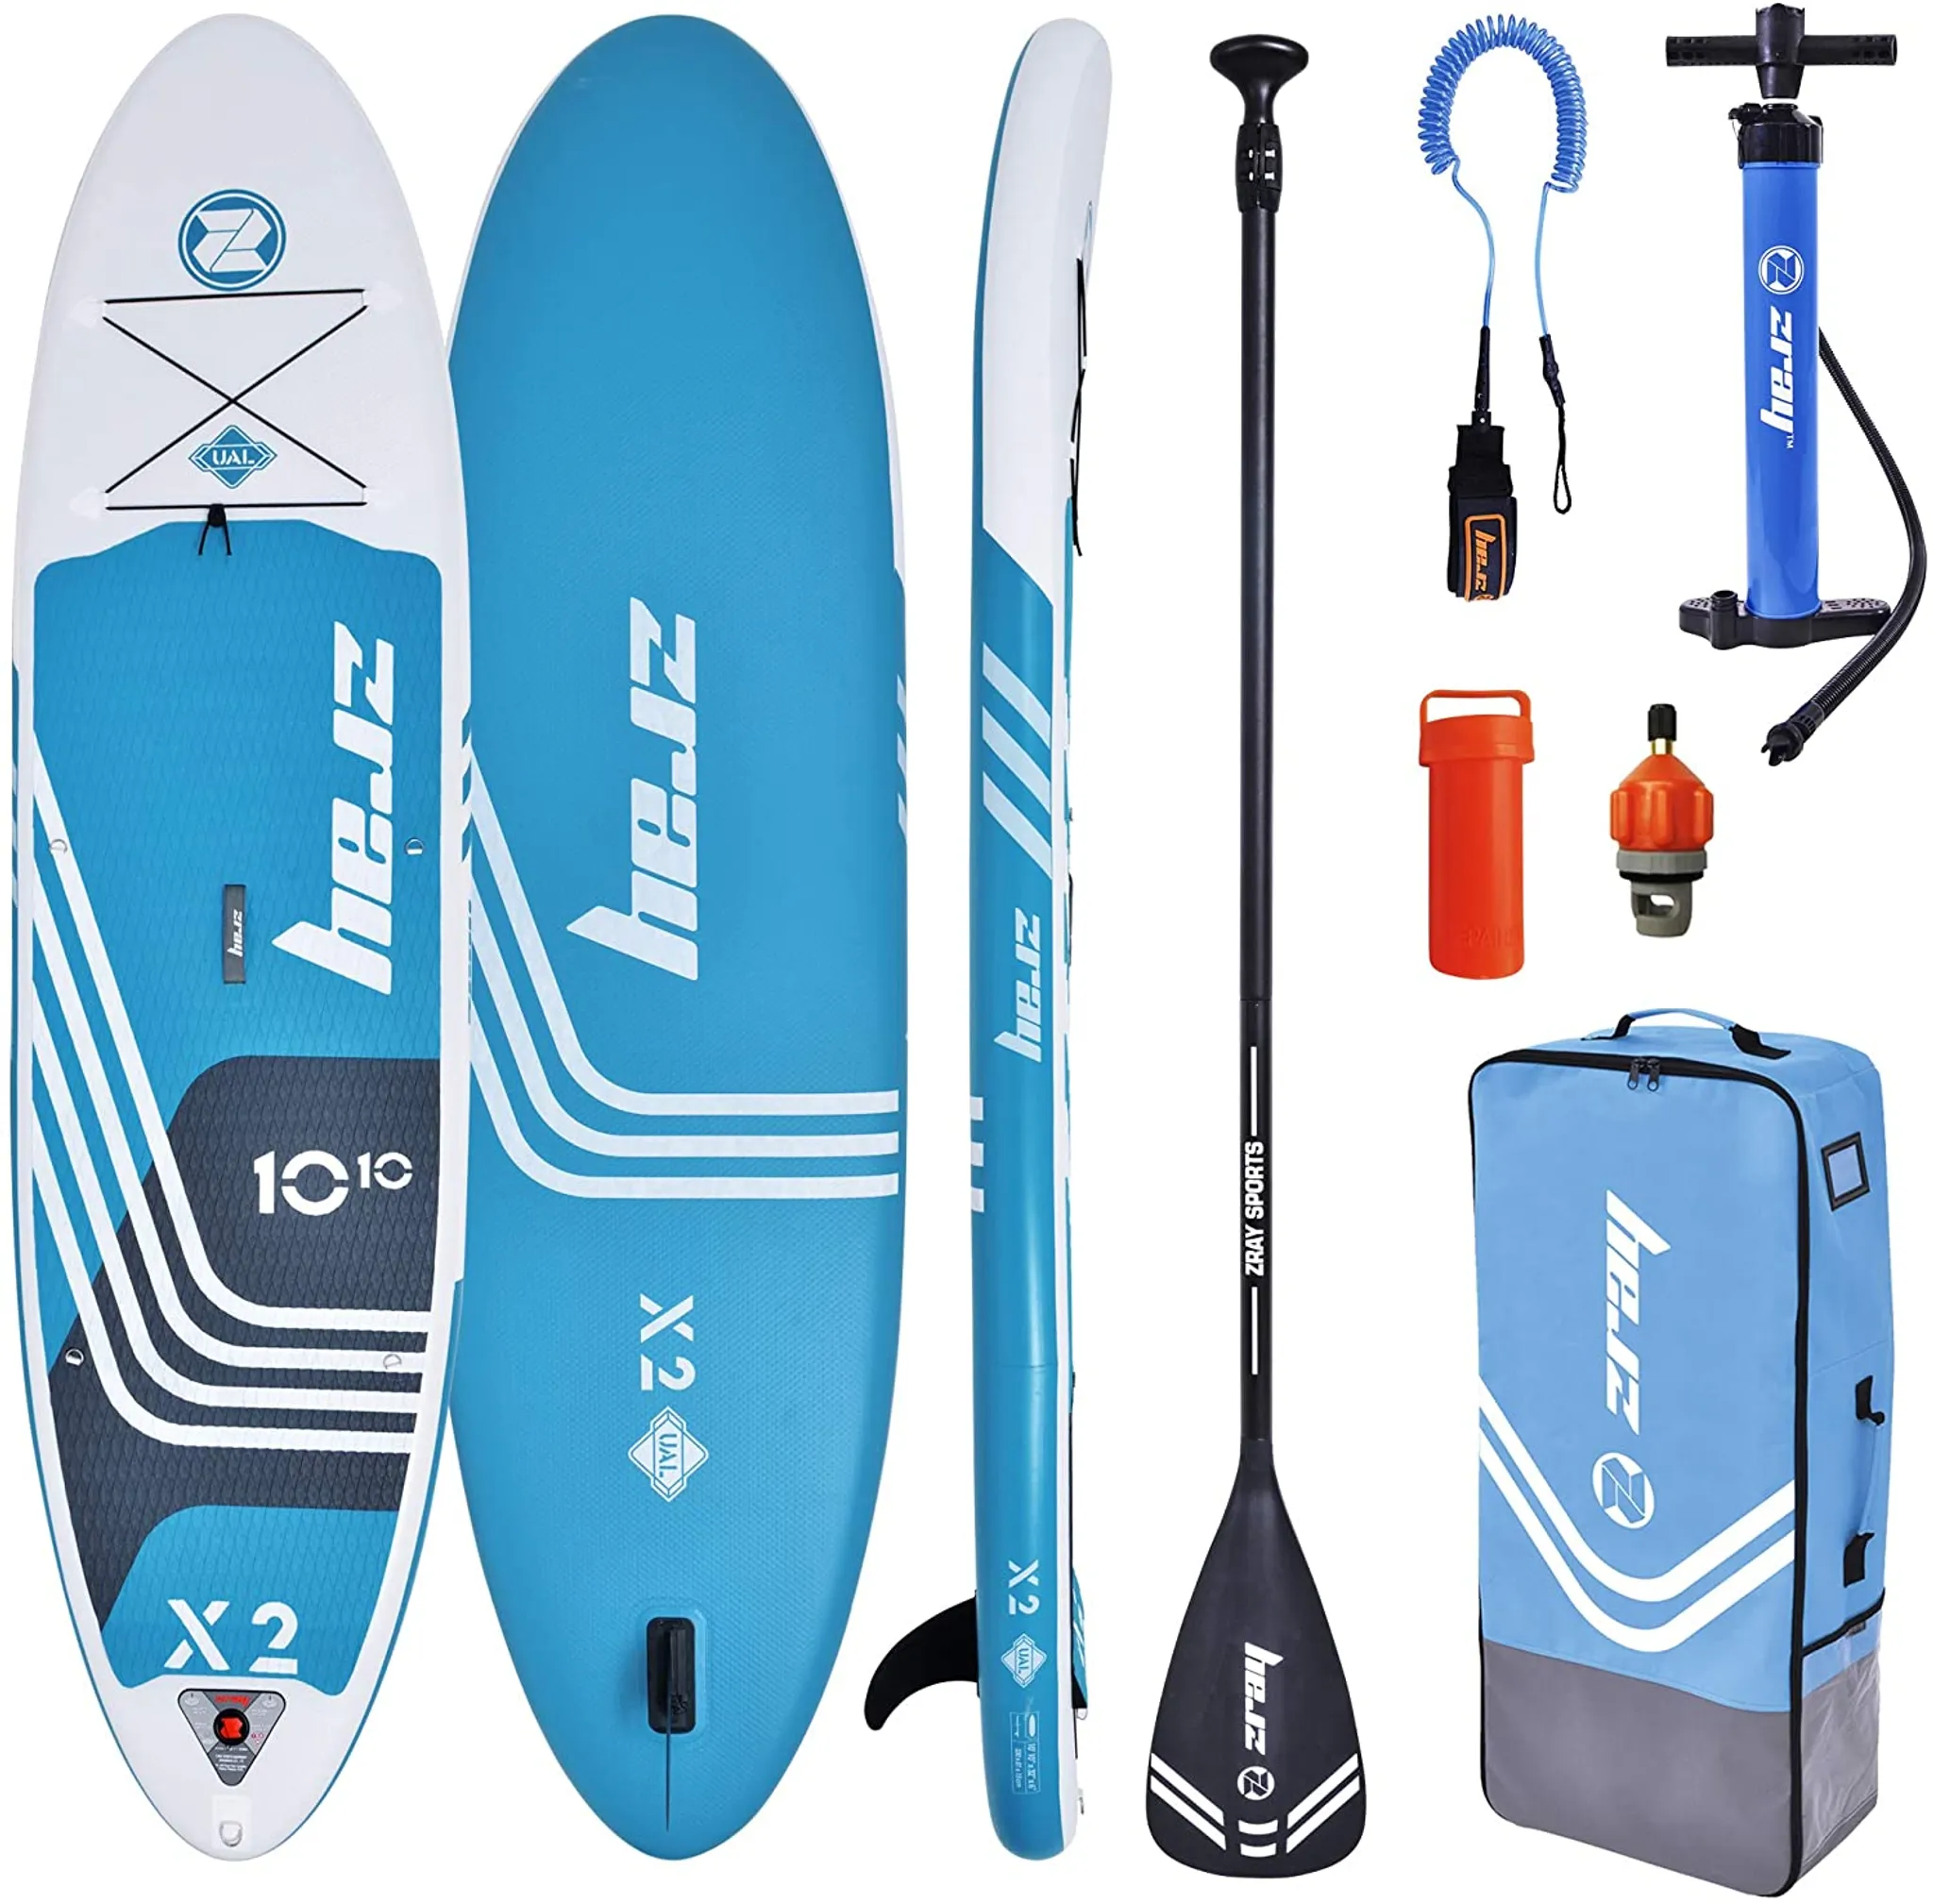 SUP X2 Stand Paddle 10.10 Up Board Zray